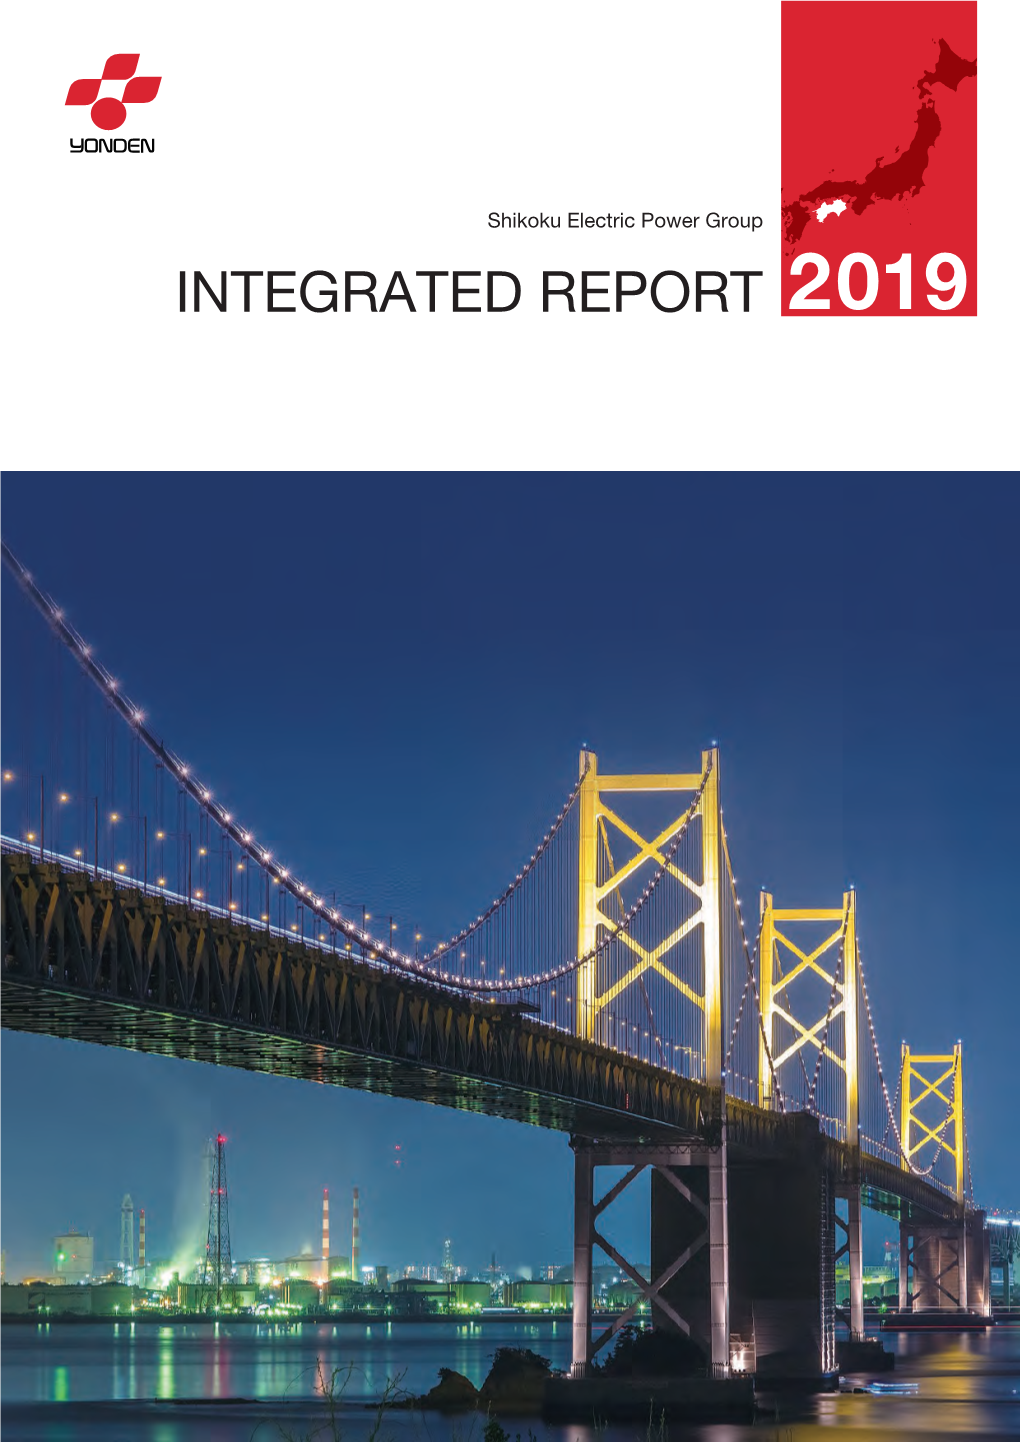 INTEGRATED REPORT 2019 Editorial Policy